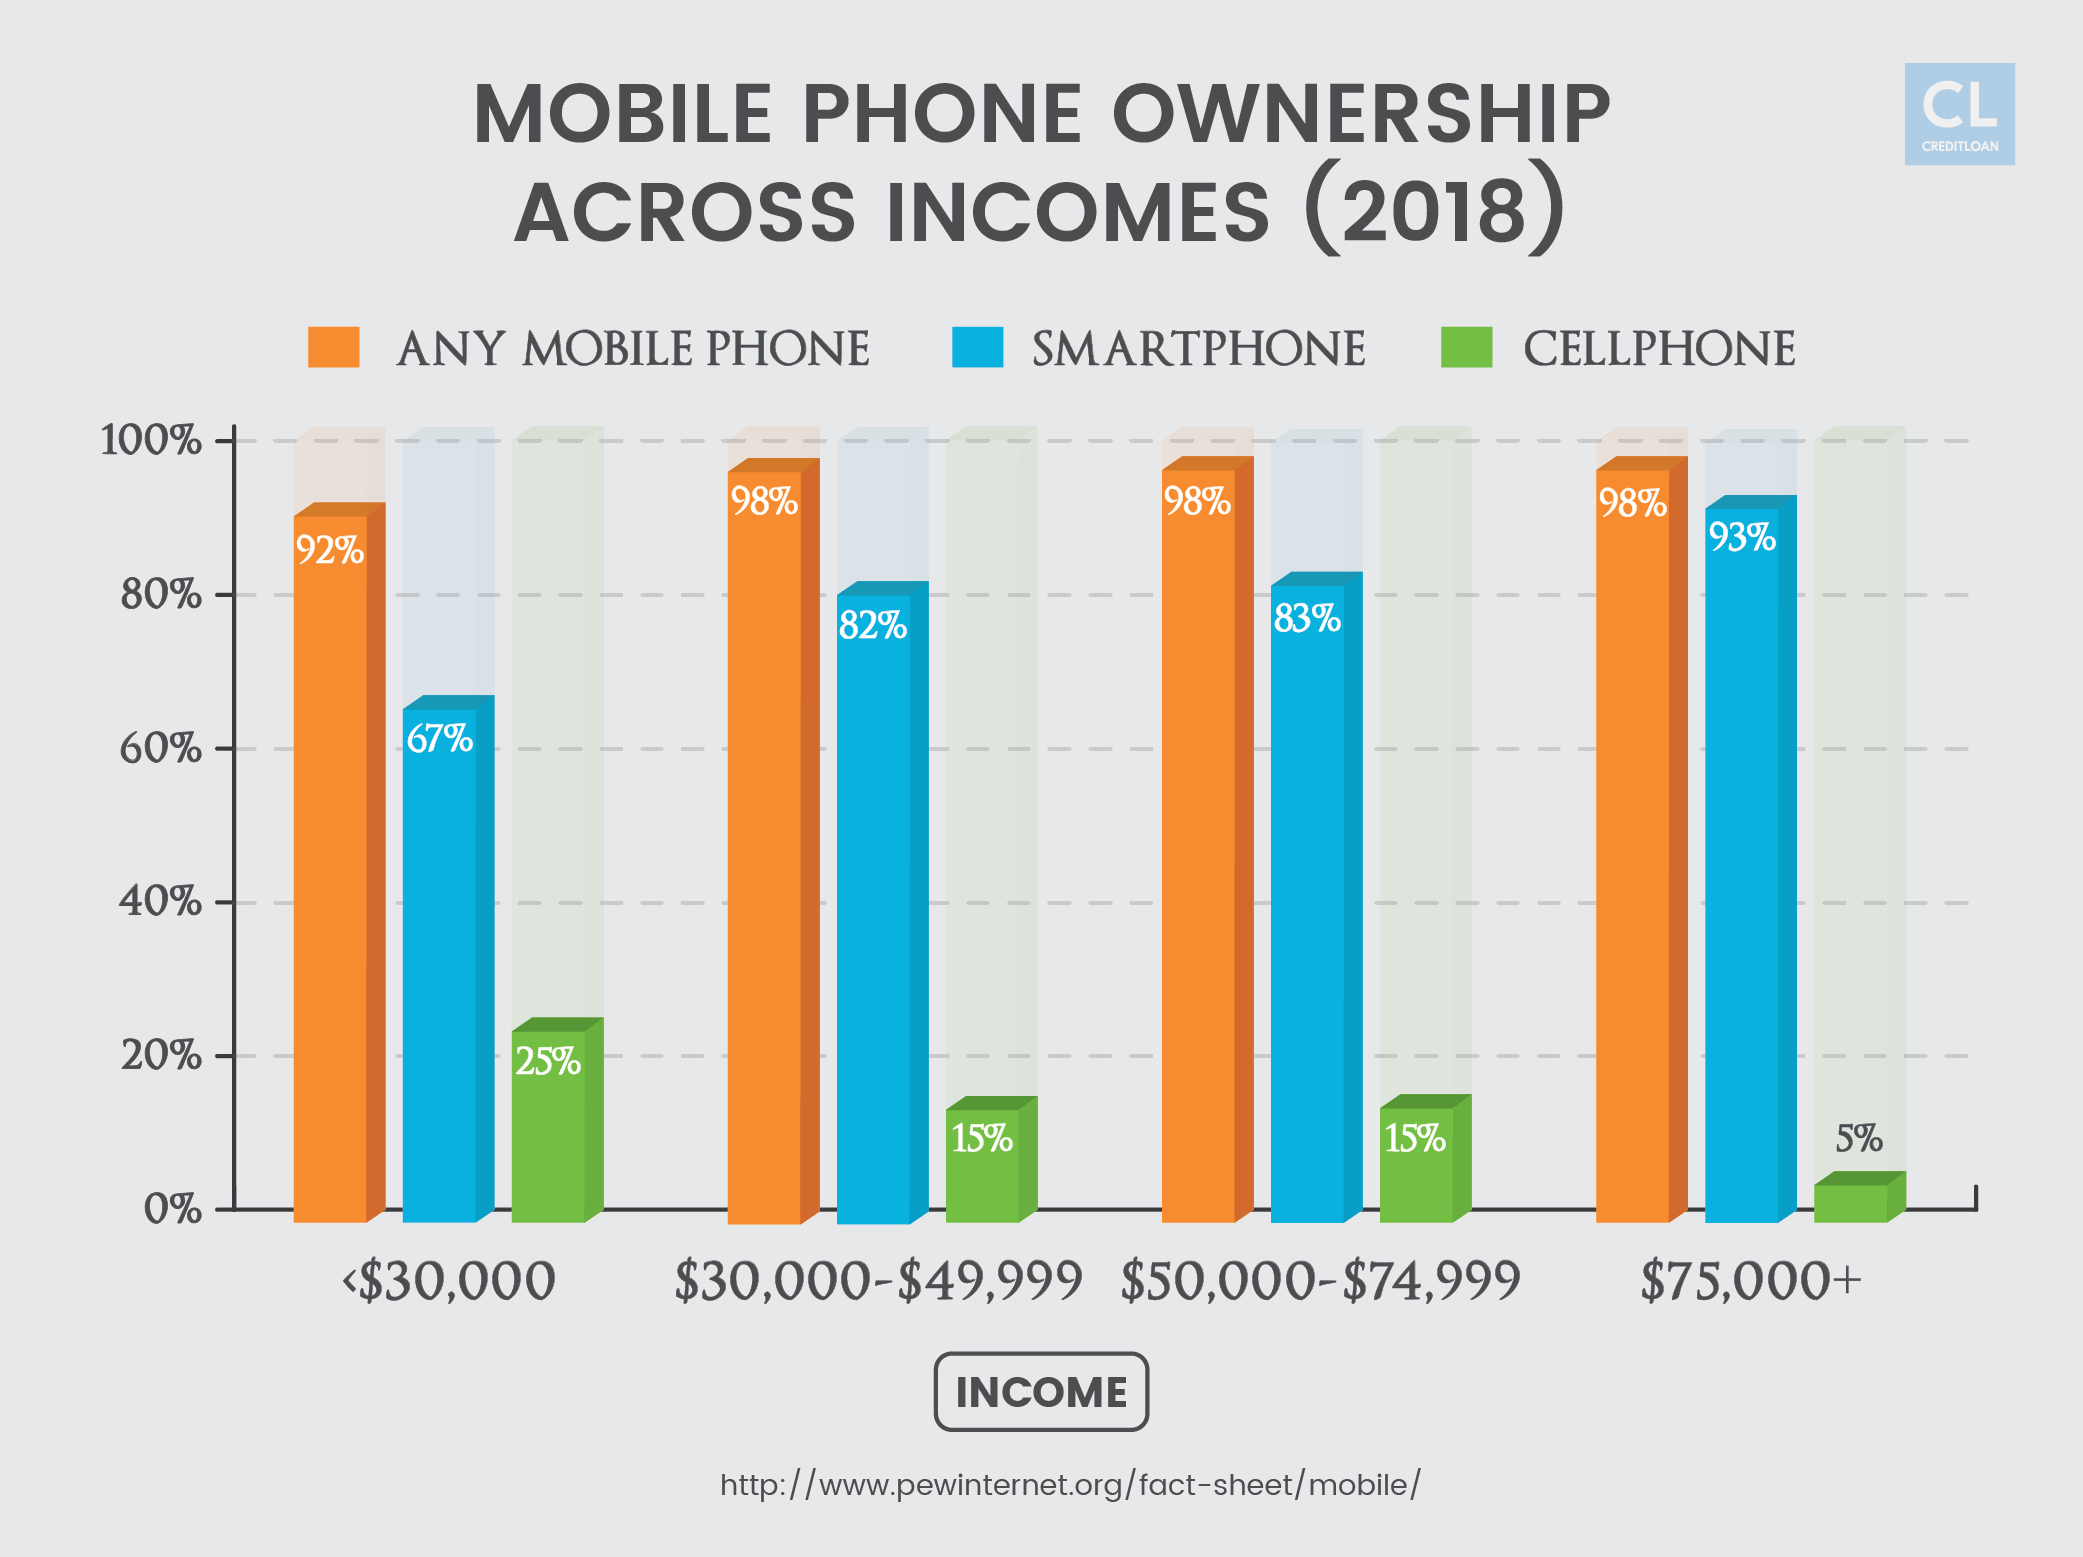 Mobile Phone Ownership Across Incomes in 2018